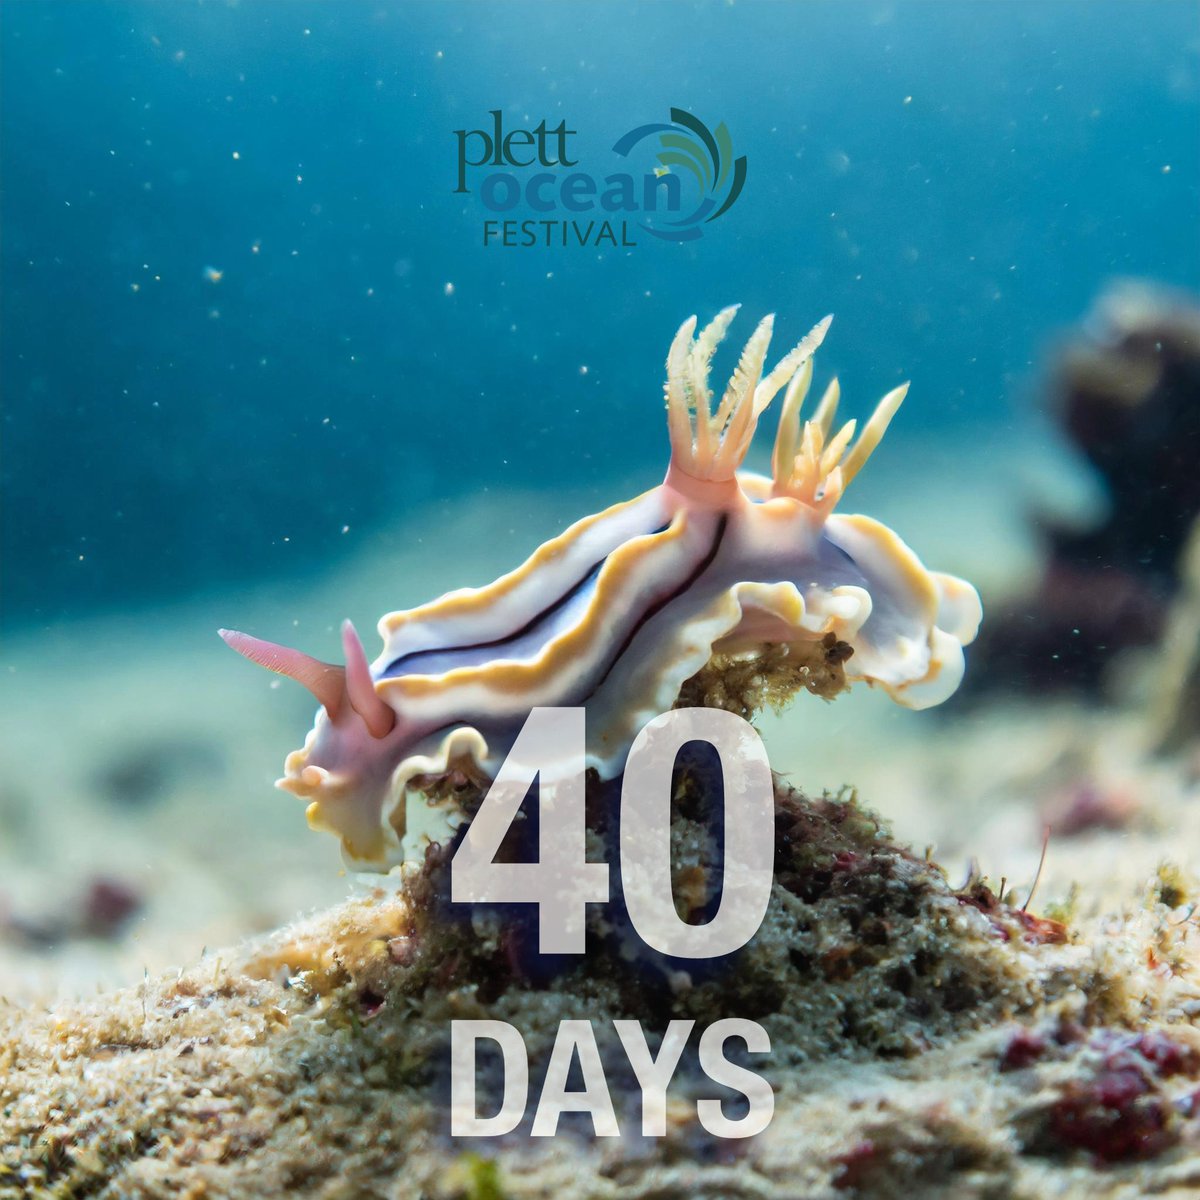 Counting down to #PlettOceanFestival 🌊🌍🐟 40 days until the festival gets under way - are you joining us in #Plett this June? Find out more: bit.ly/PlettOceanFest